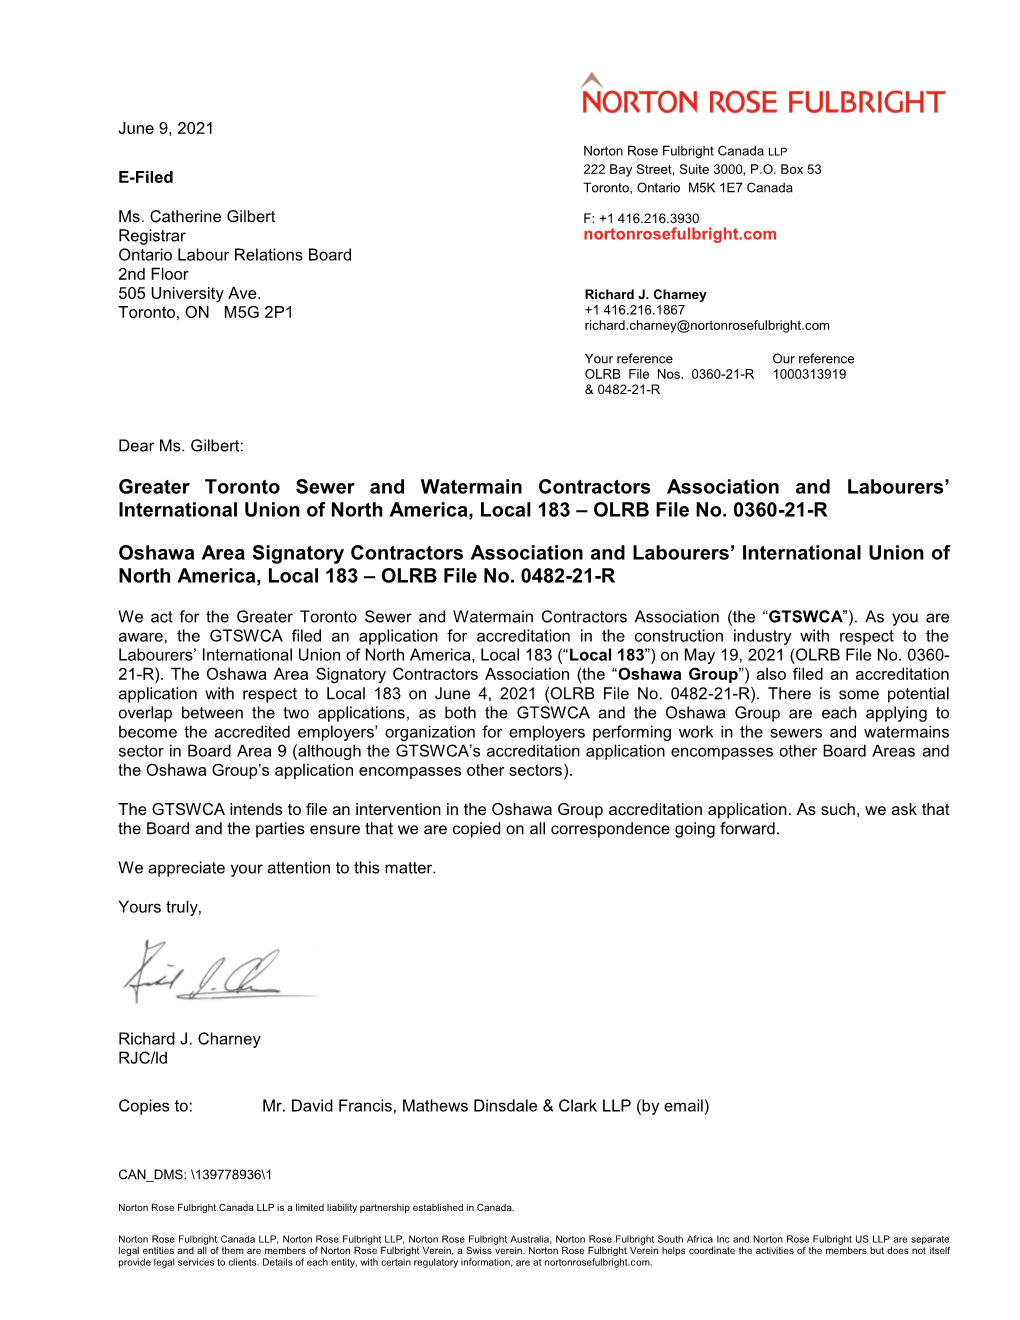 Greater Toronto Sewer and Watermain Contractors Association and Labourers’ International Union of North America, Local 183 – OLRB File No